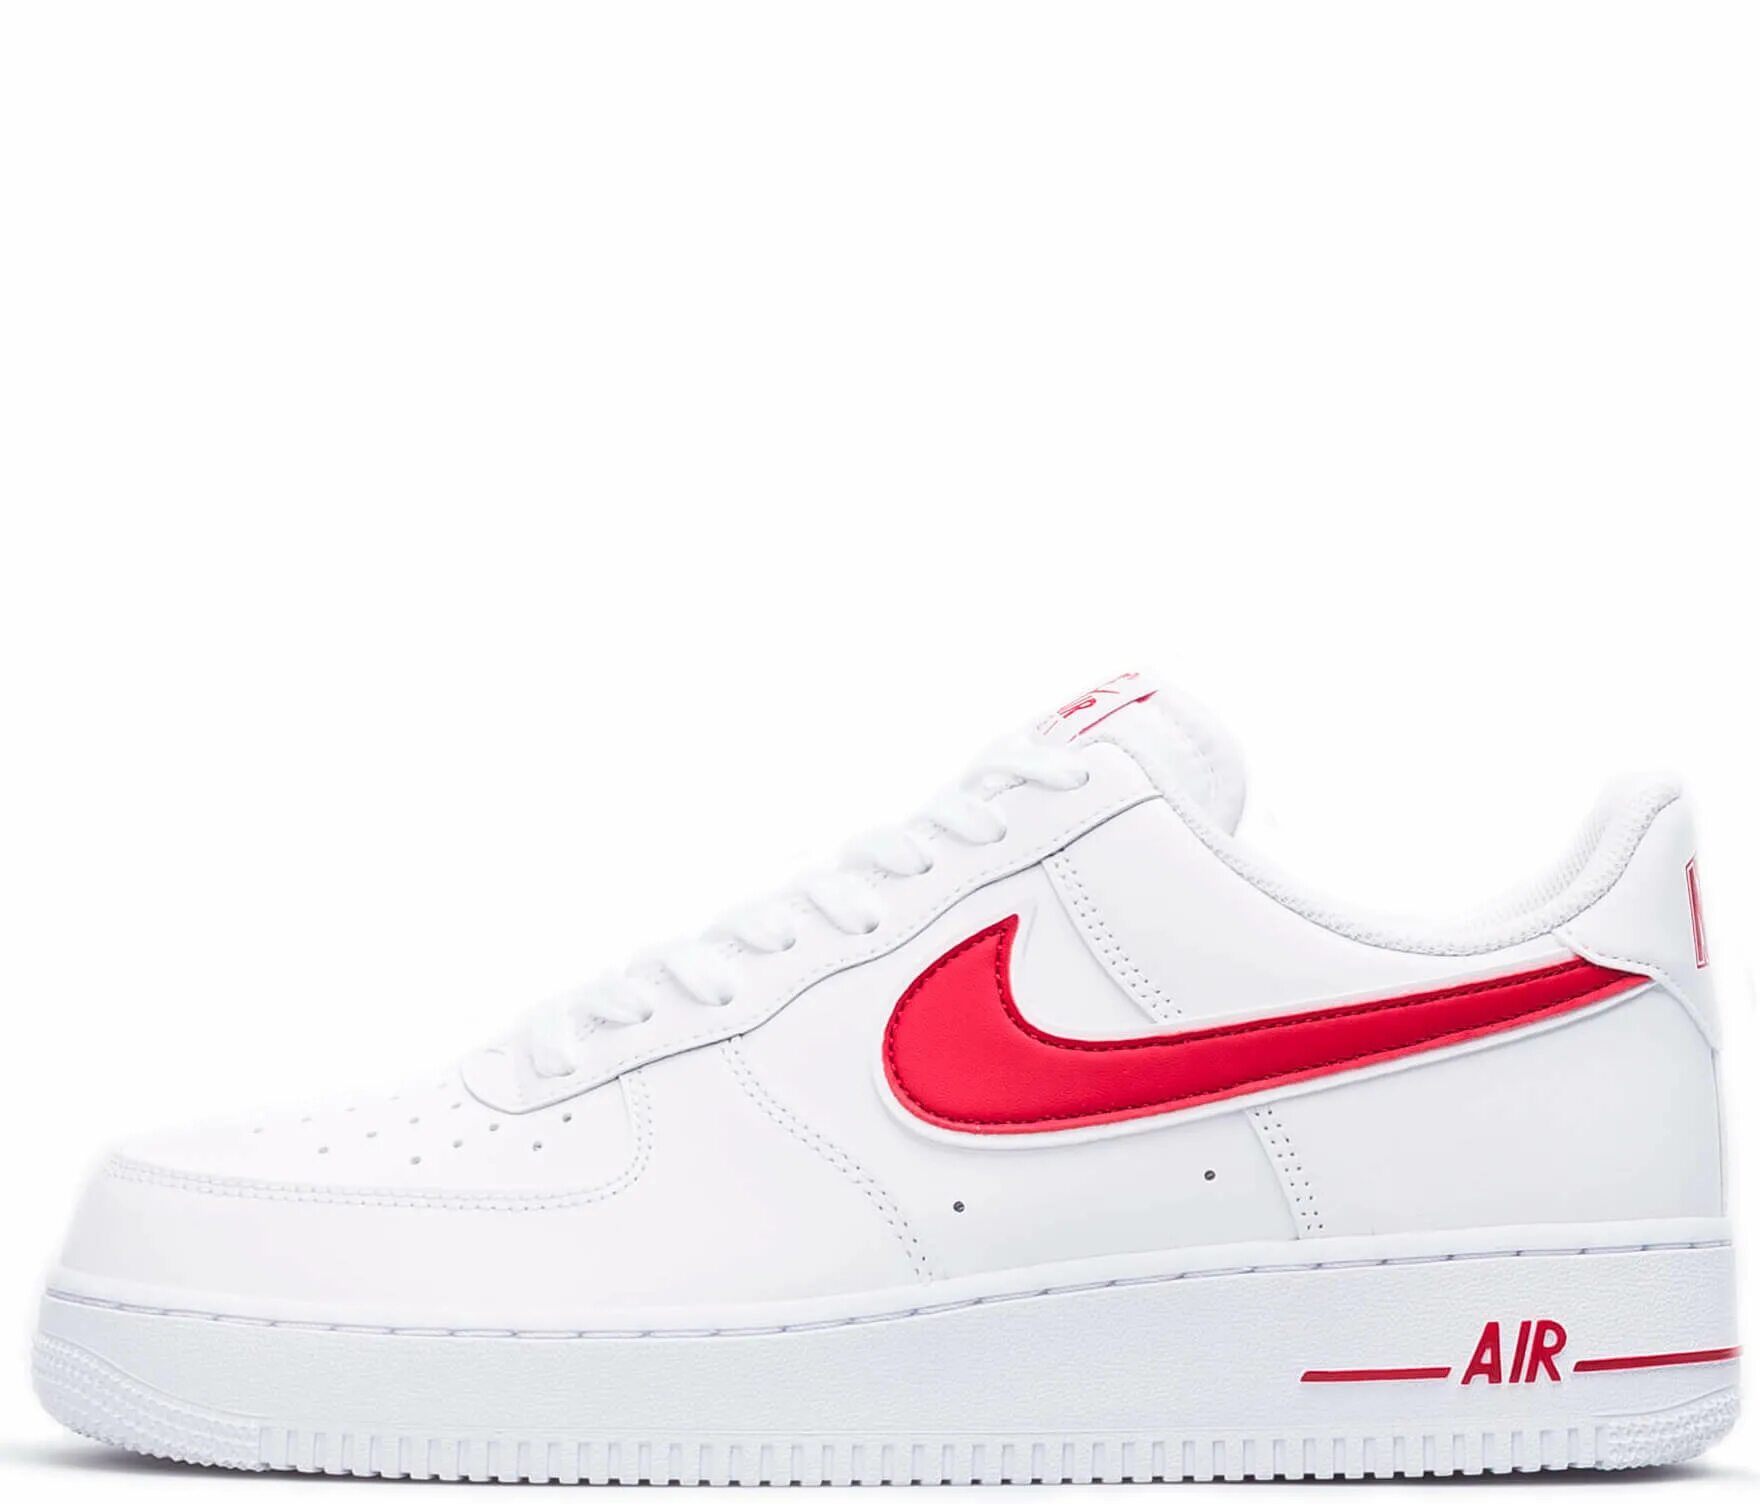 Nike Air Force 1 Low White Red. Nike Air Force 1 lv8 White/Red. Nike Air Force 1 White Red. Nike Air Force 1 lv8 White. Nike air force купить в москве